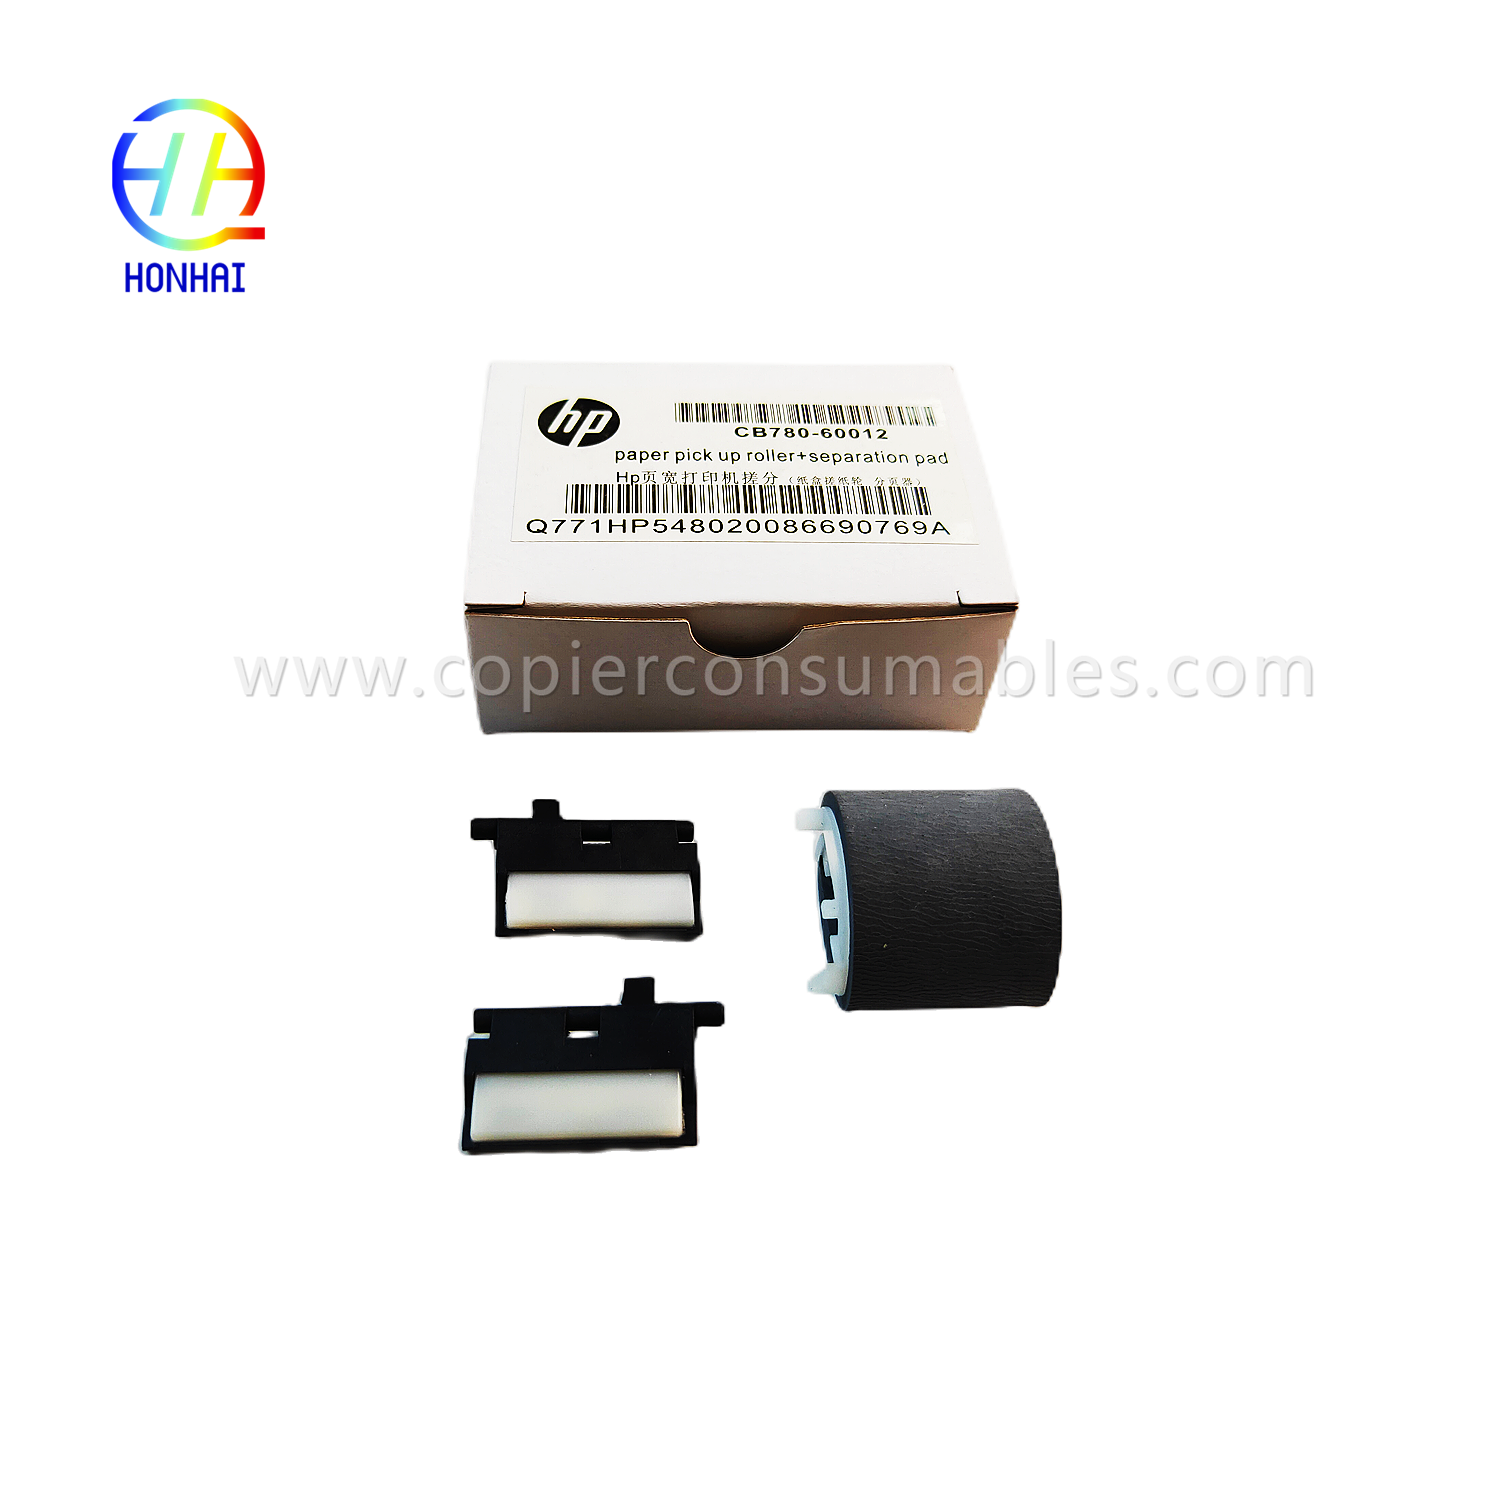 https://www.copierconsumables.com/paper-pickup-roller-separates-pad%ef%bc%88set%ef%bc%89for-hp-pagewide-x585z-x451dn-x476dn-x551dw-x576dw-5856dn-5856dn 452dn-477dn-552-577z-cb780-60012-product/